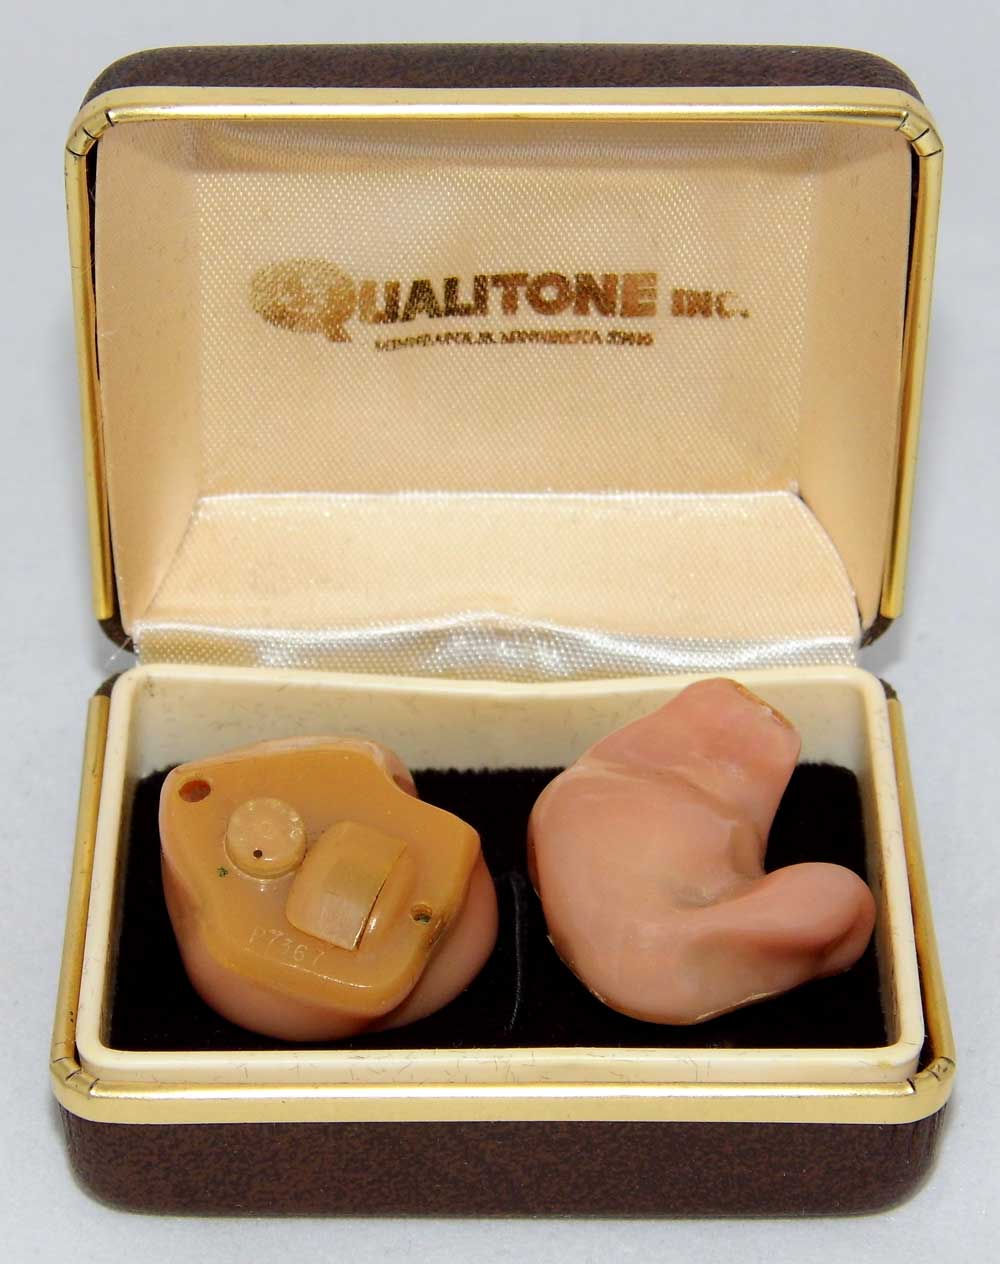 Vintage Qualitone In-The-Ear hearing aids